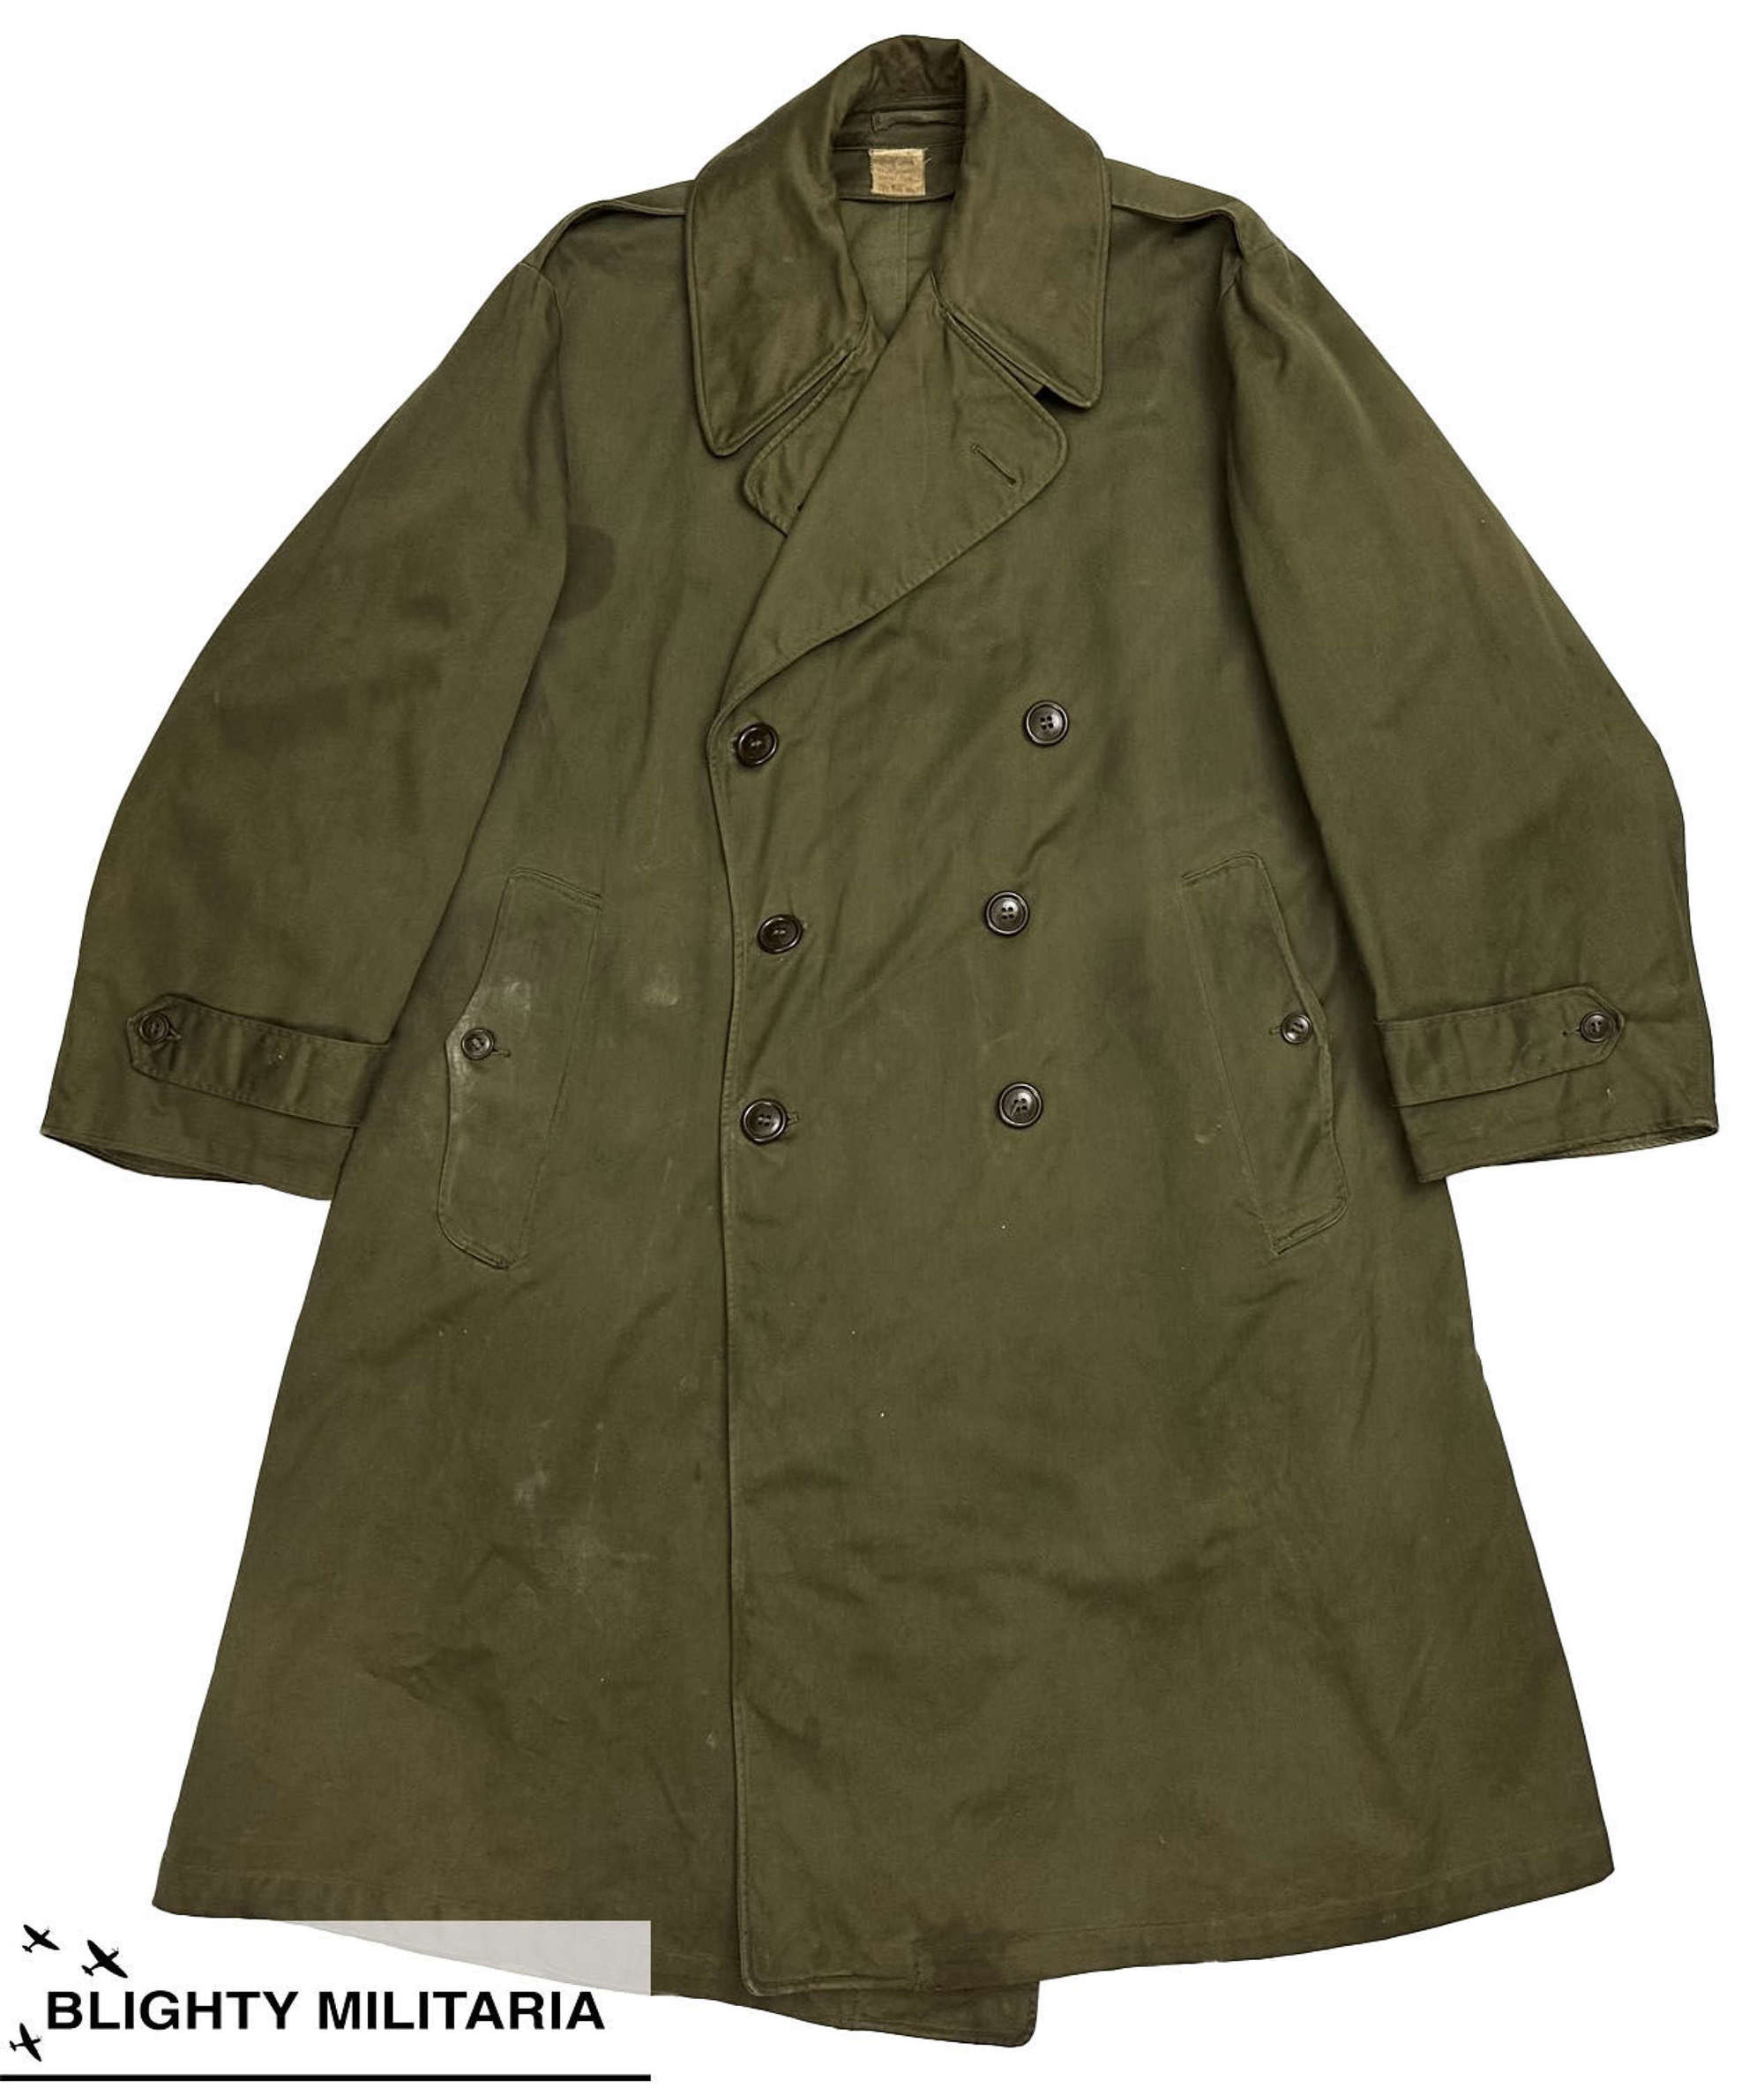 Original 1946 Dated American Army Raincoat - Size Short Large